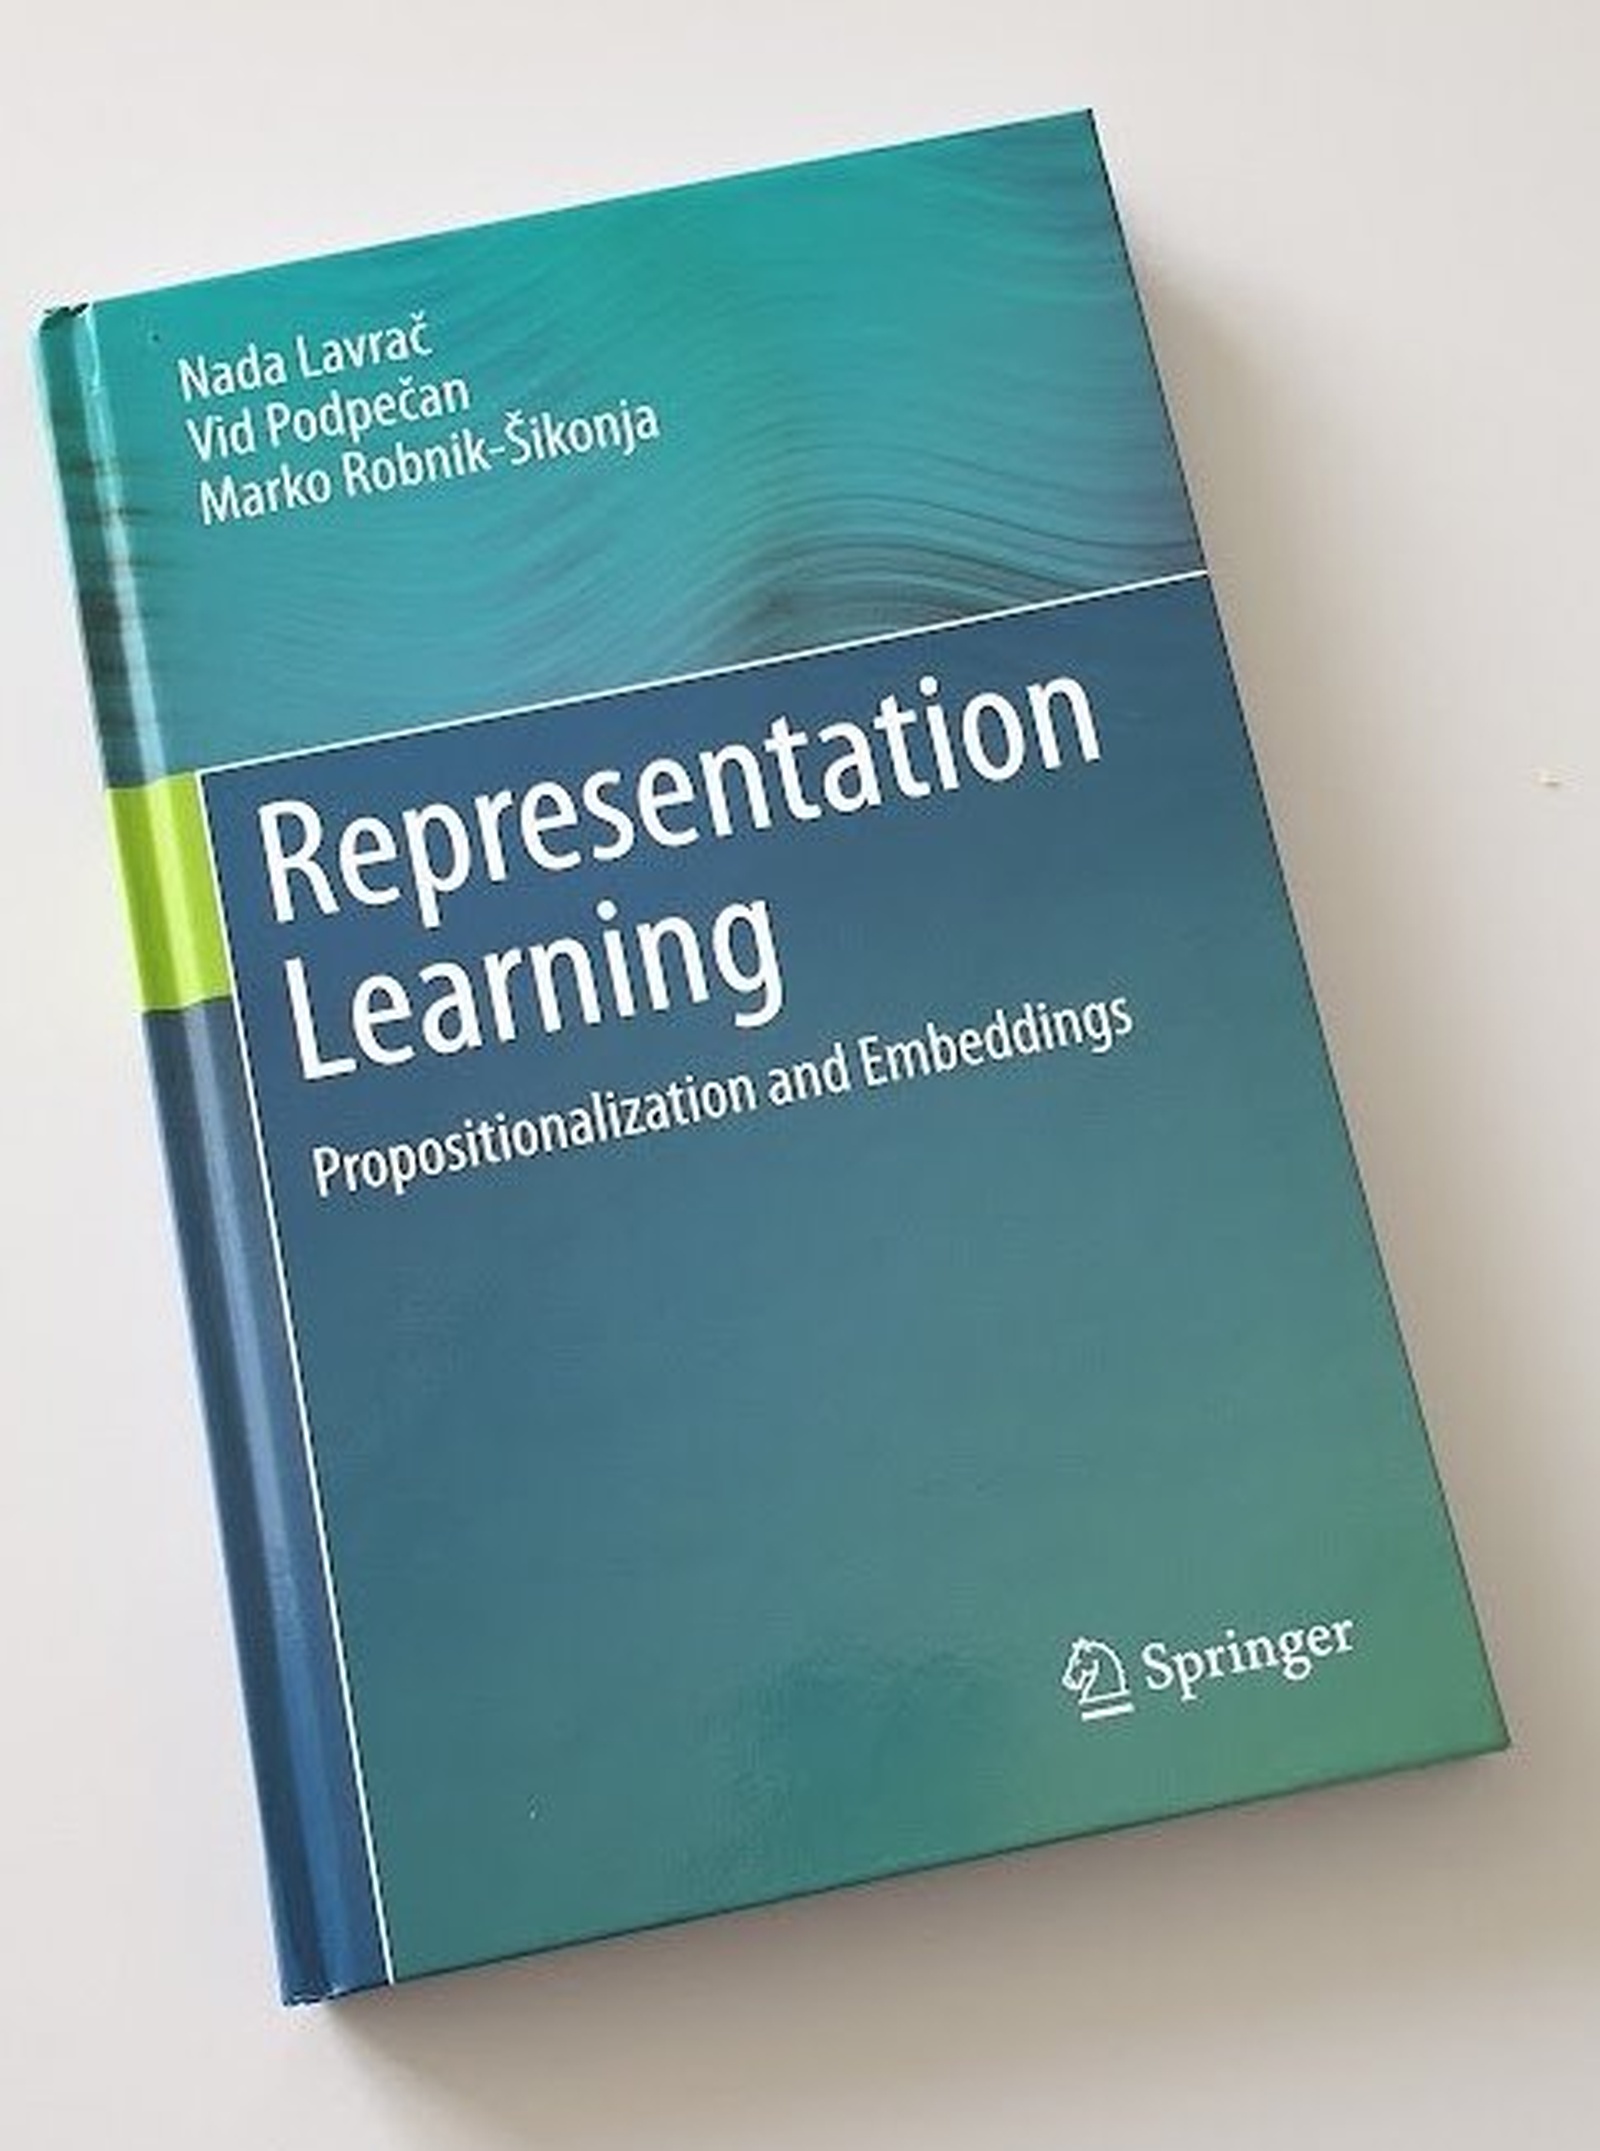 A monograph on representation learning was published by the Springer publishing house